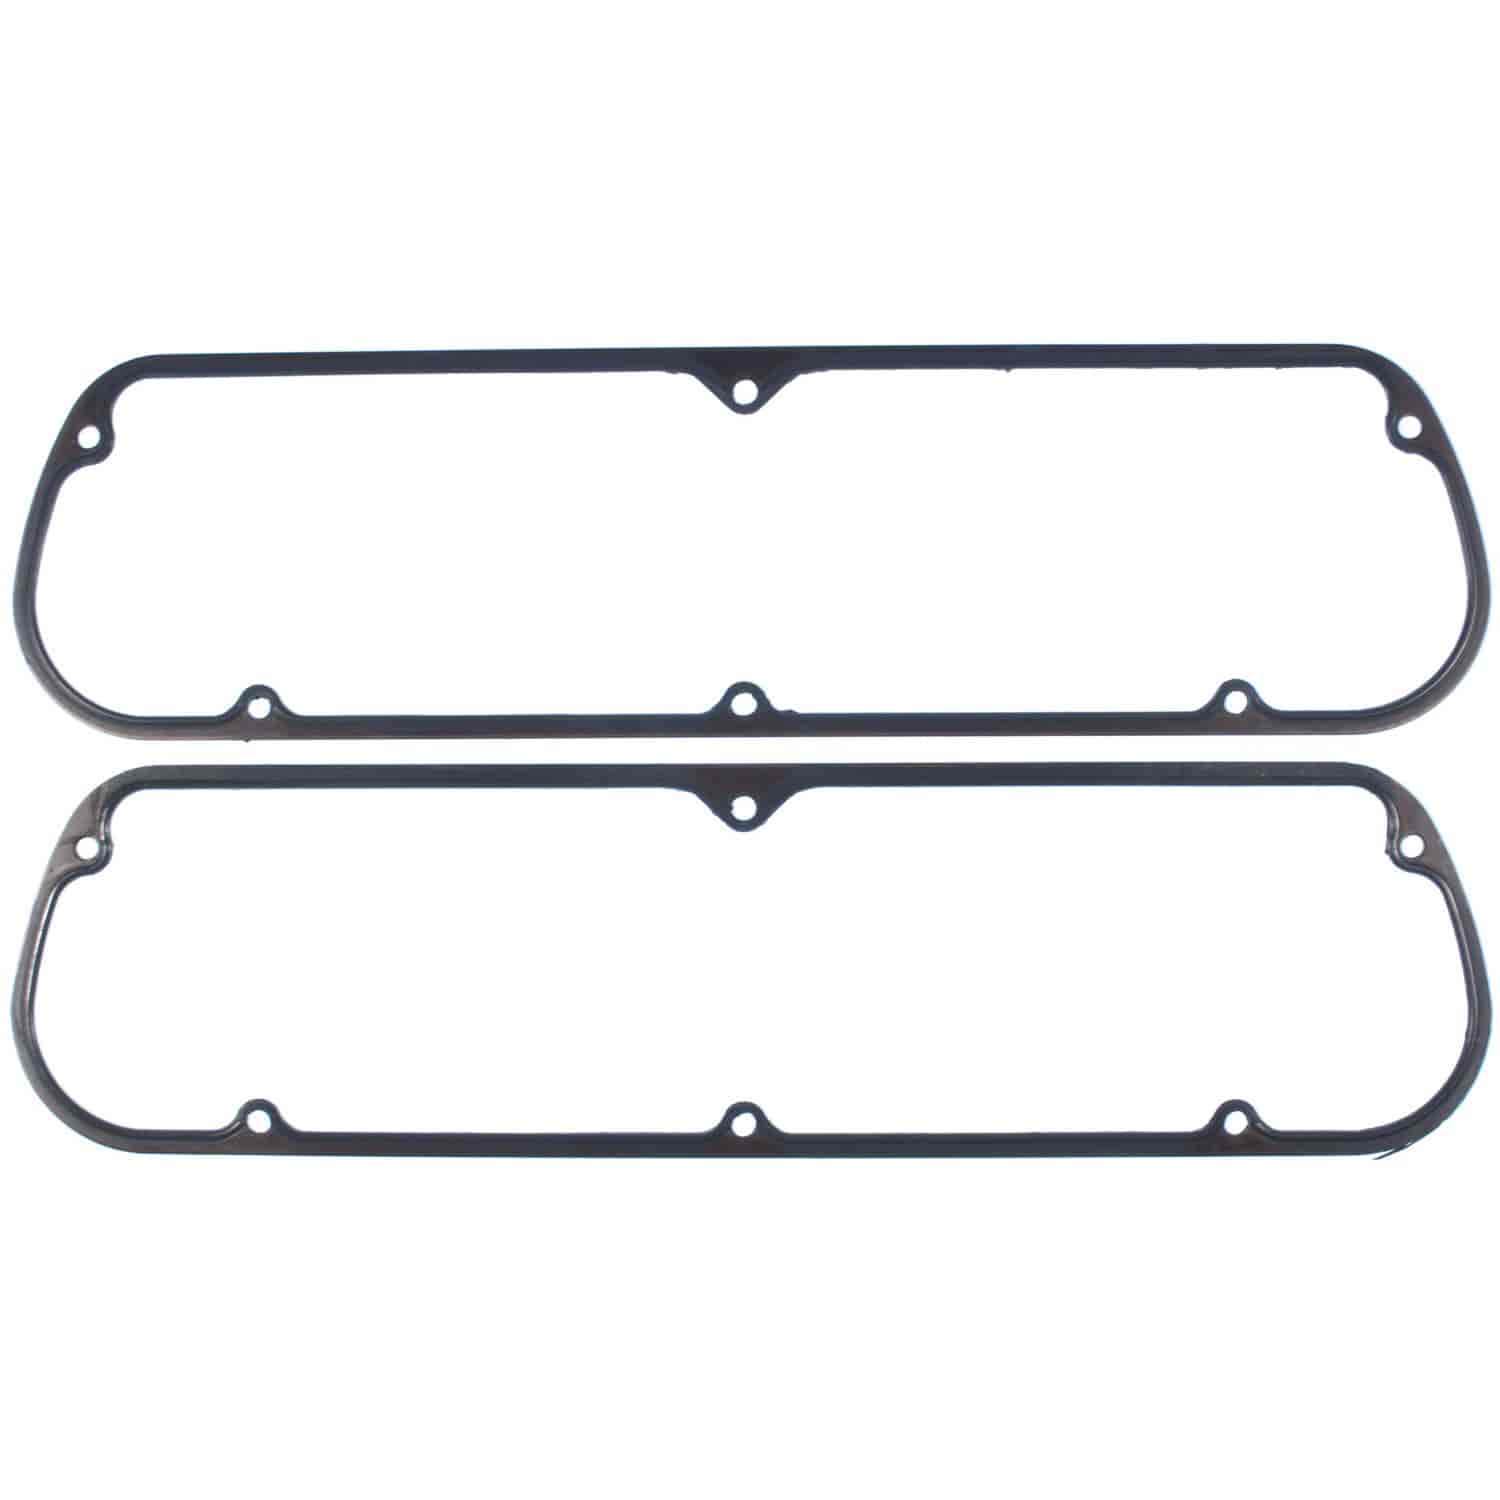 Valve Cover Gasket Set 1968-2001 Small Block Ford 302/351W (5.0/5.8L) in Molded Rubber